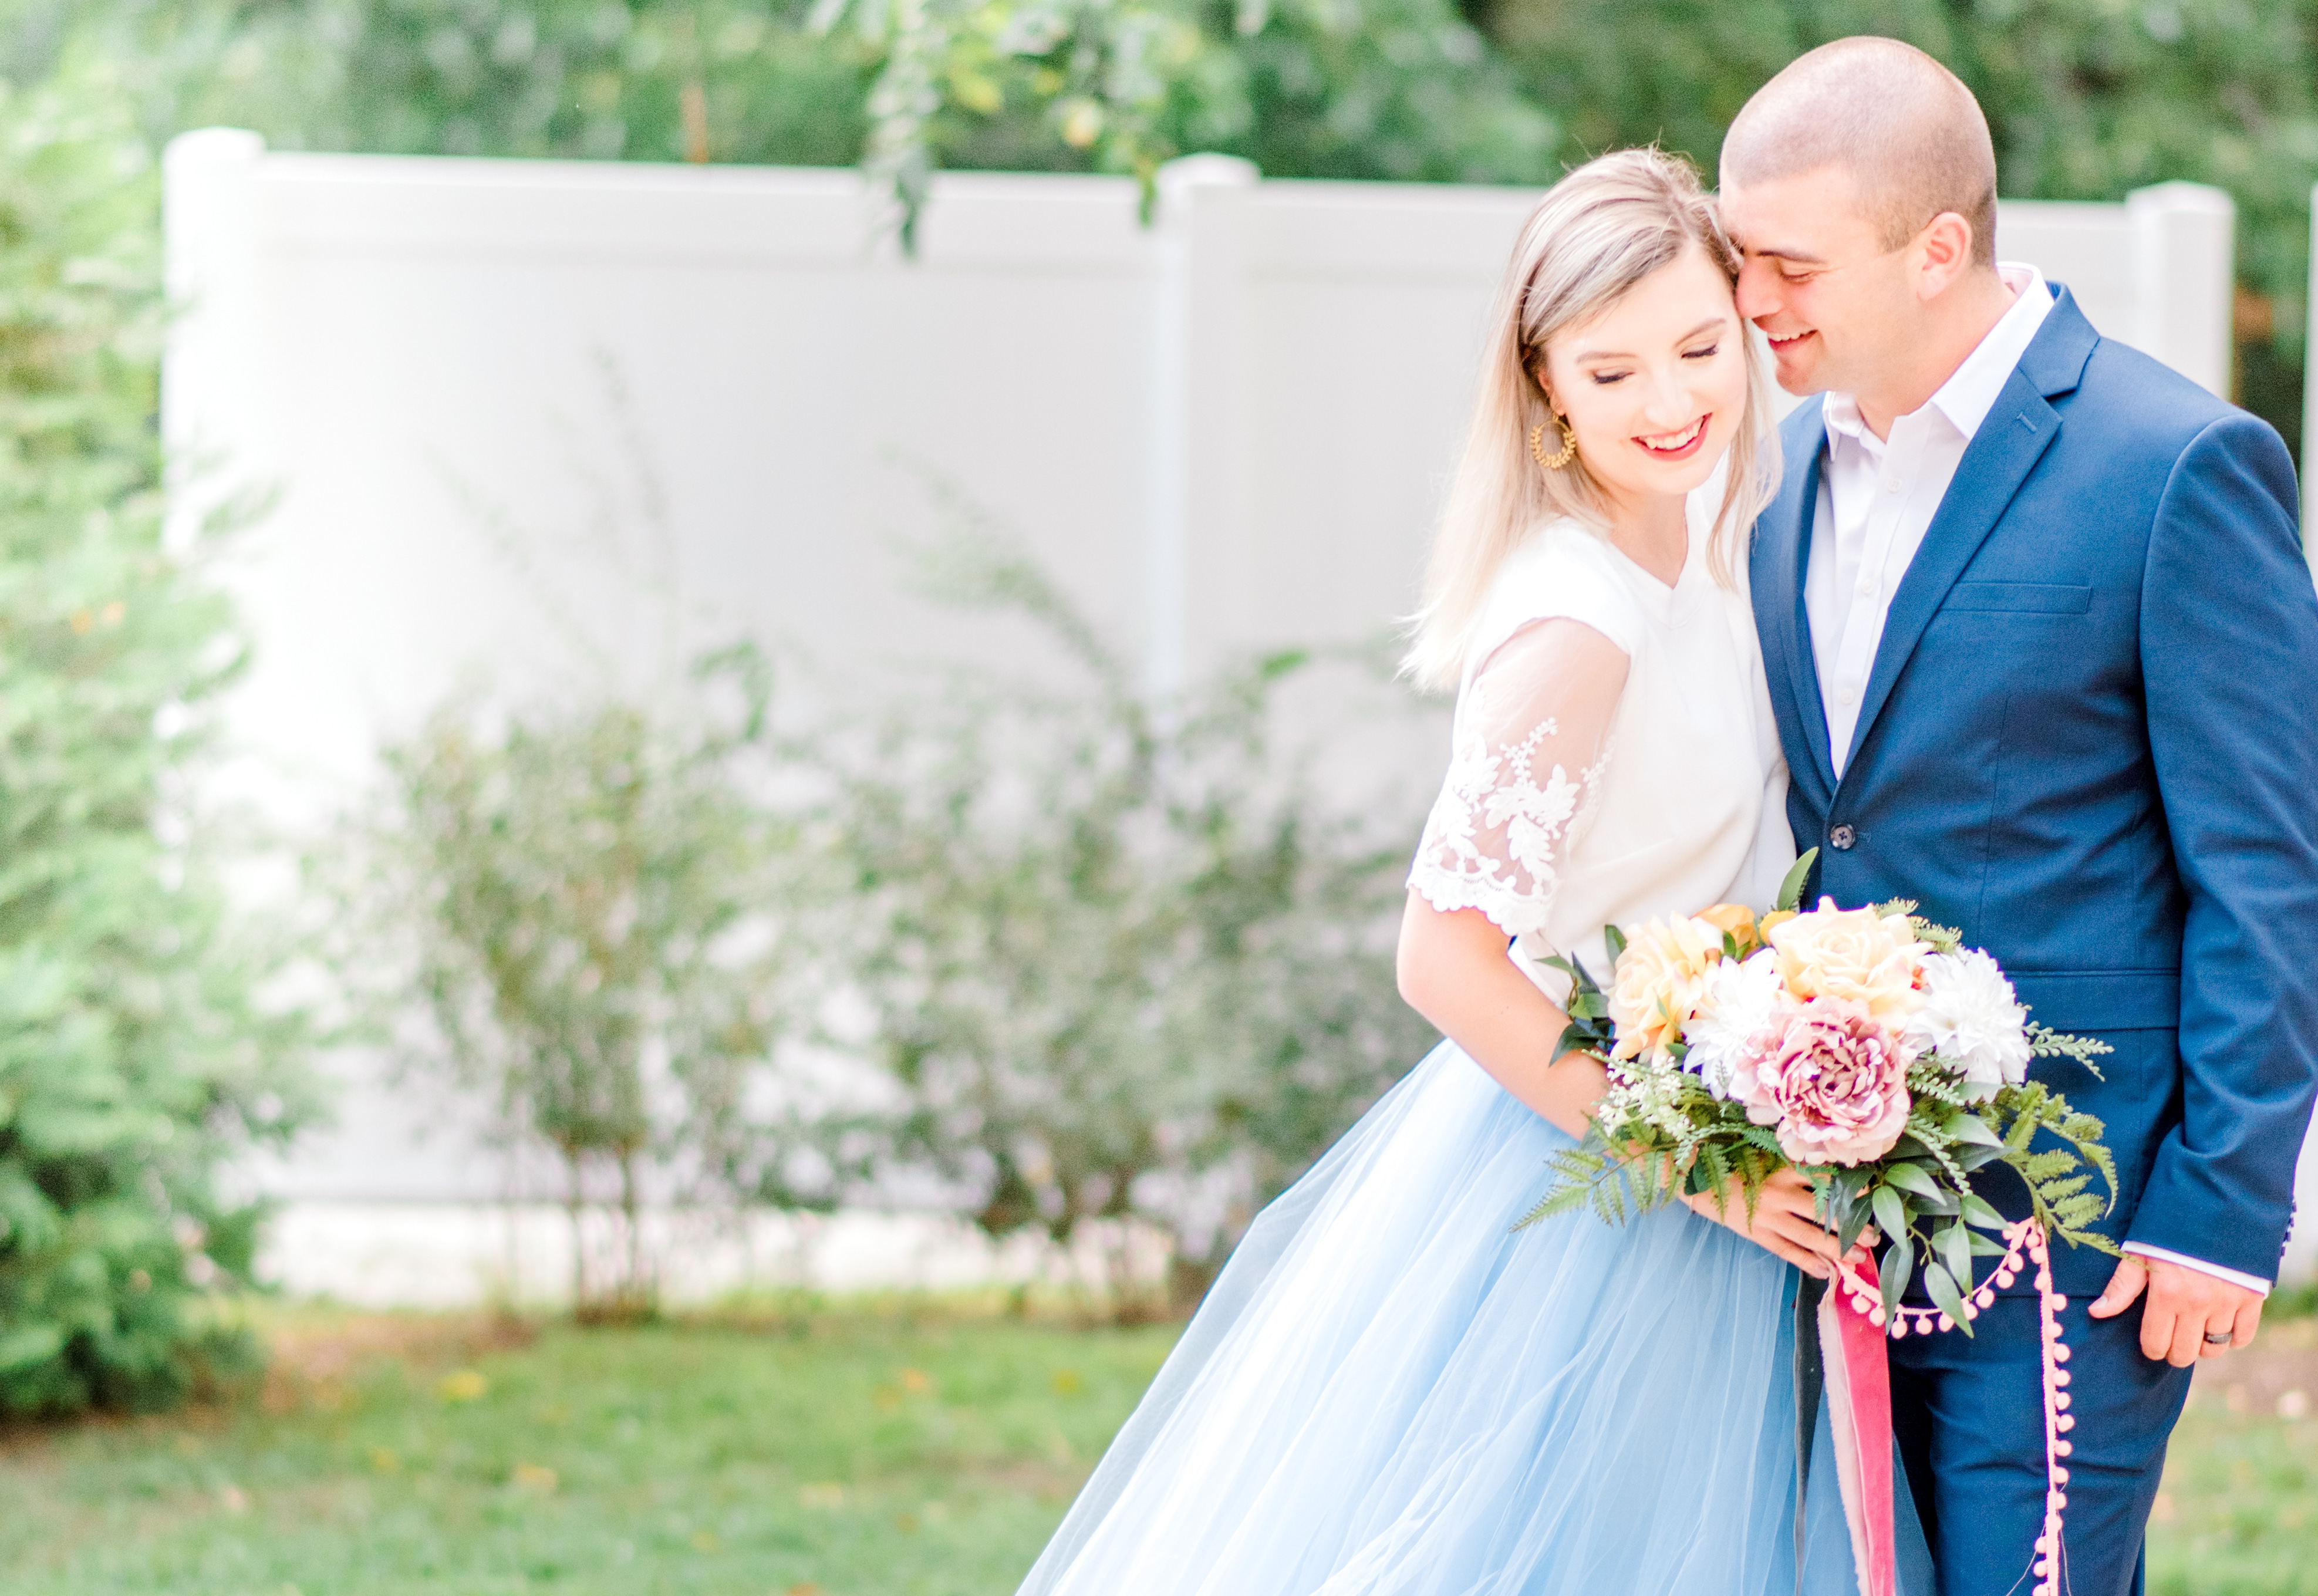 Engagement couple shoot with woman with blue puffy skirt and shirt shirt with her fiancé wearing a blue suit